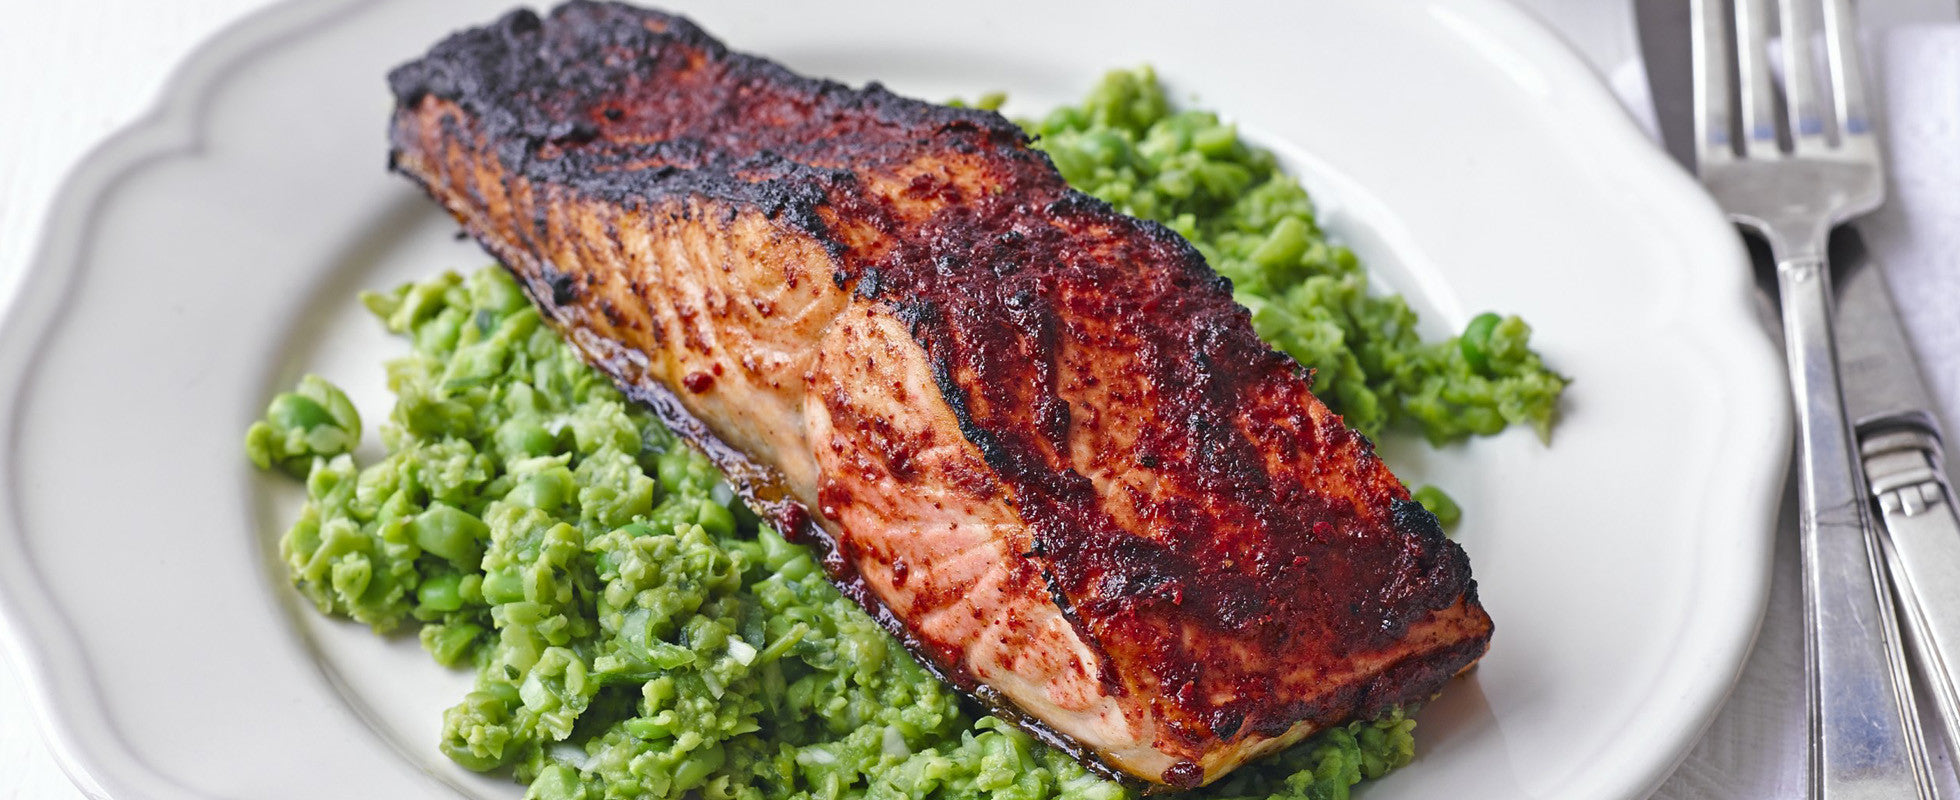 #RecipeSaviours: Spiced Grilled Salmon With Pea And Mint Mash